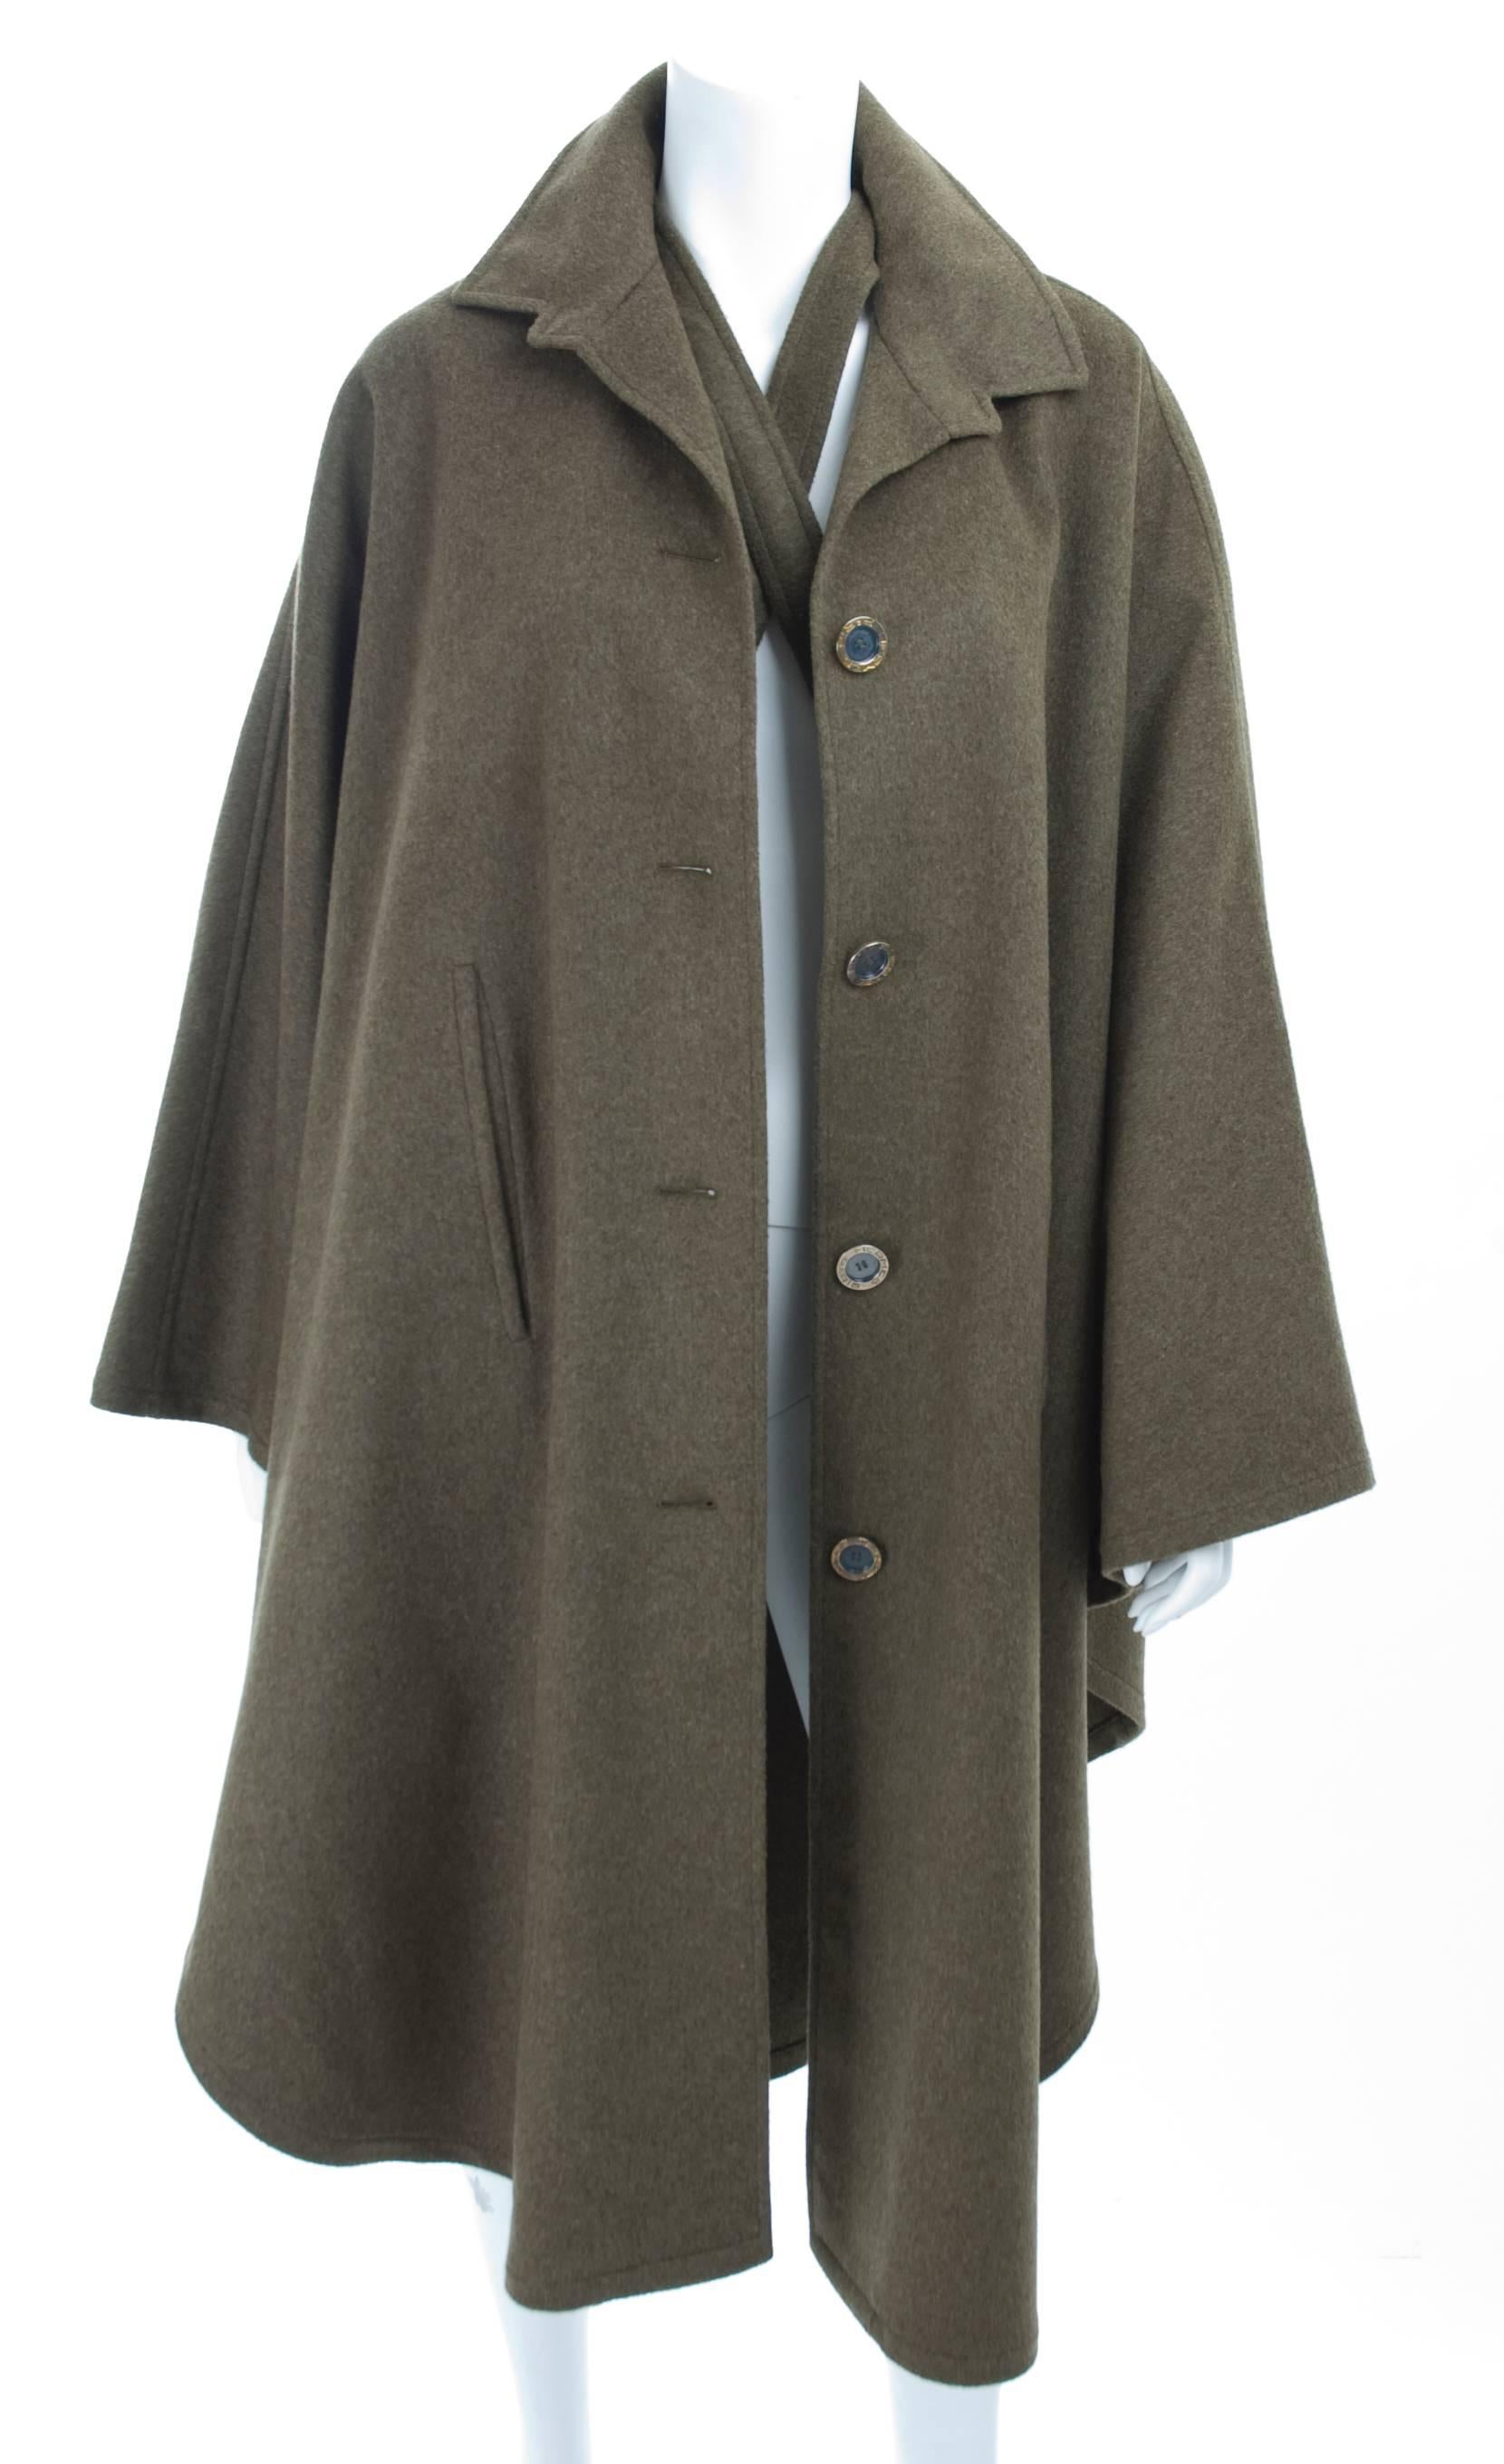 Vintage Hermes oliv green cape with lamb leather trim.
Hermes Paris signature buttons.
Excellent condition- no flaws to mention.
Material 70% Wool and 30% Cashmere.
Size fits all.
Measurements:
Length 44 inches
